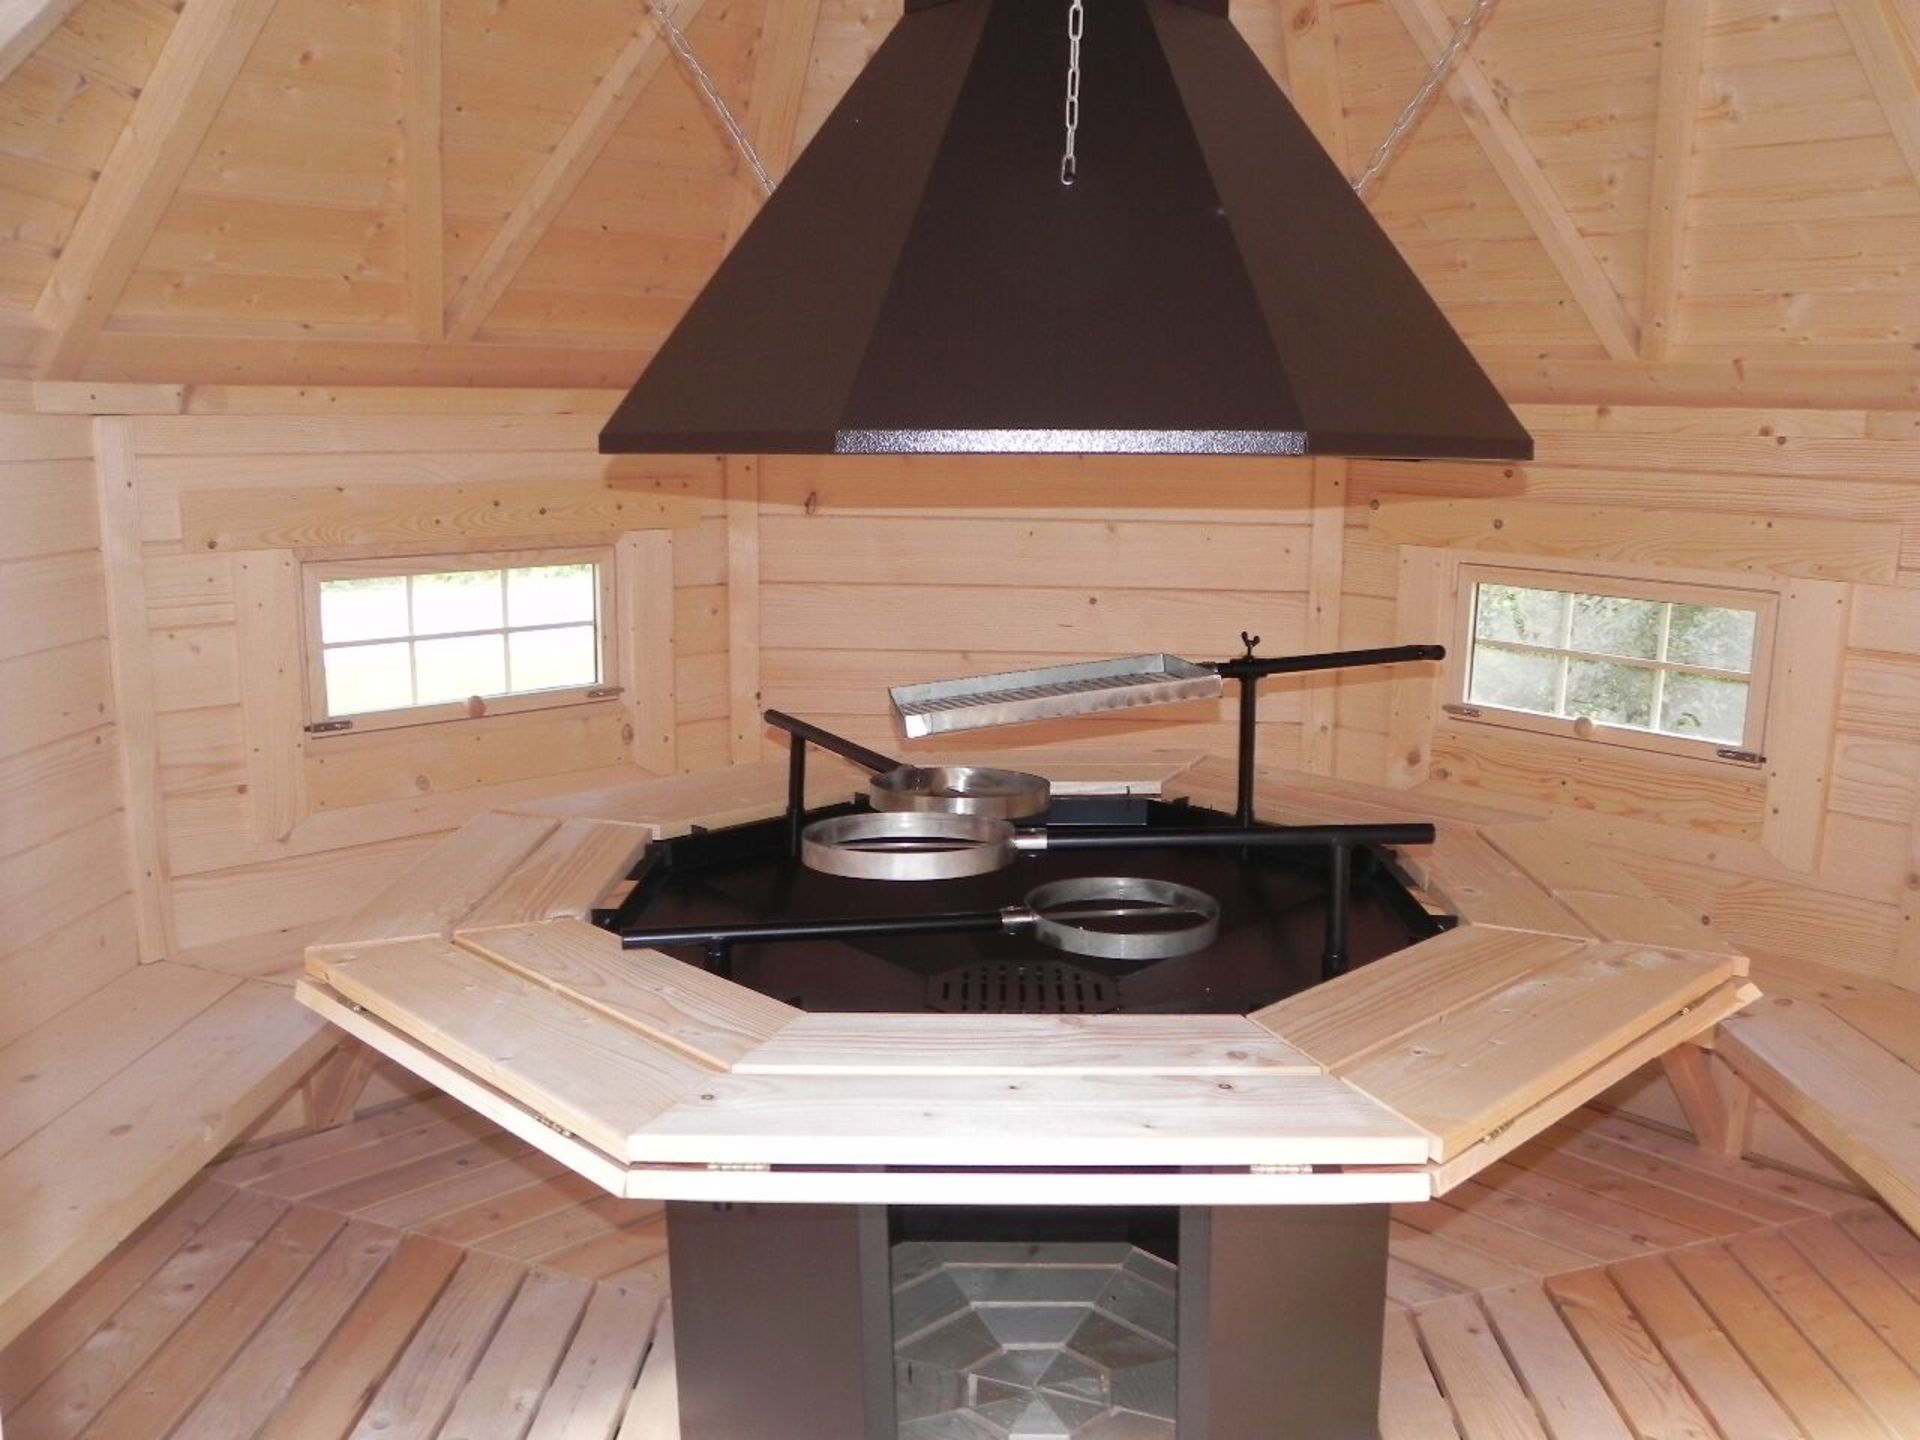 V Brand New Eight Corner 6.9m sq Grill Cabin - Standard Grill with Cooking Platforms - Table - Image 3 of 3